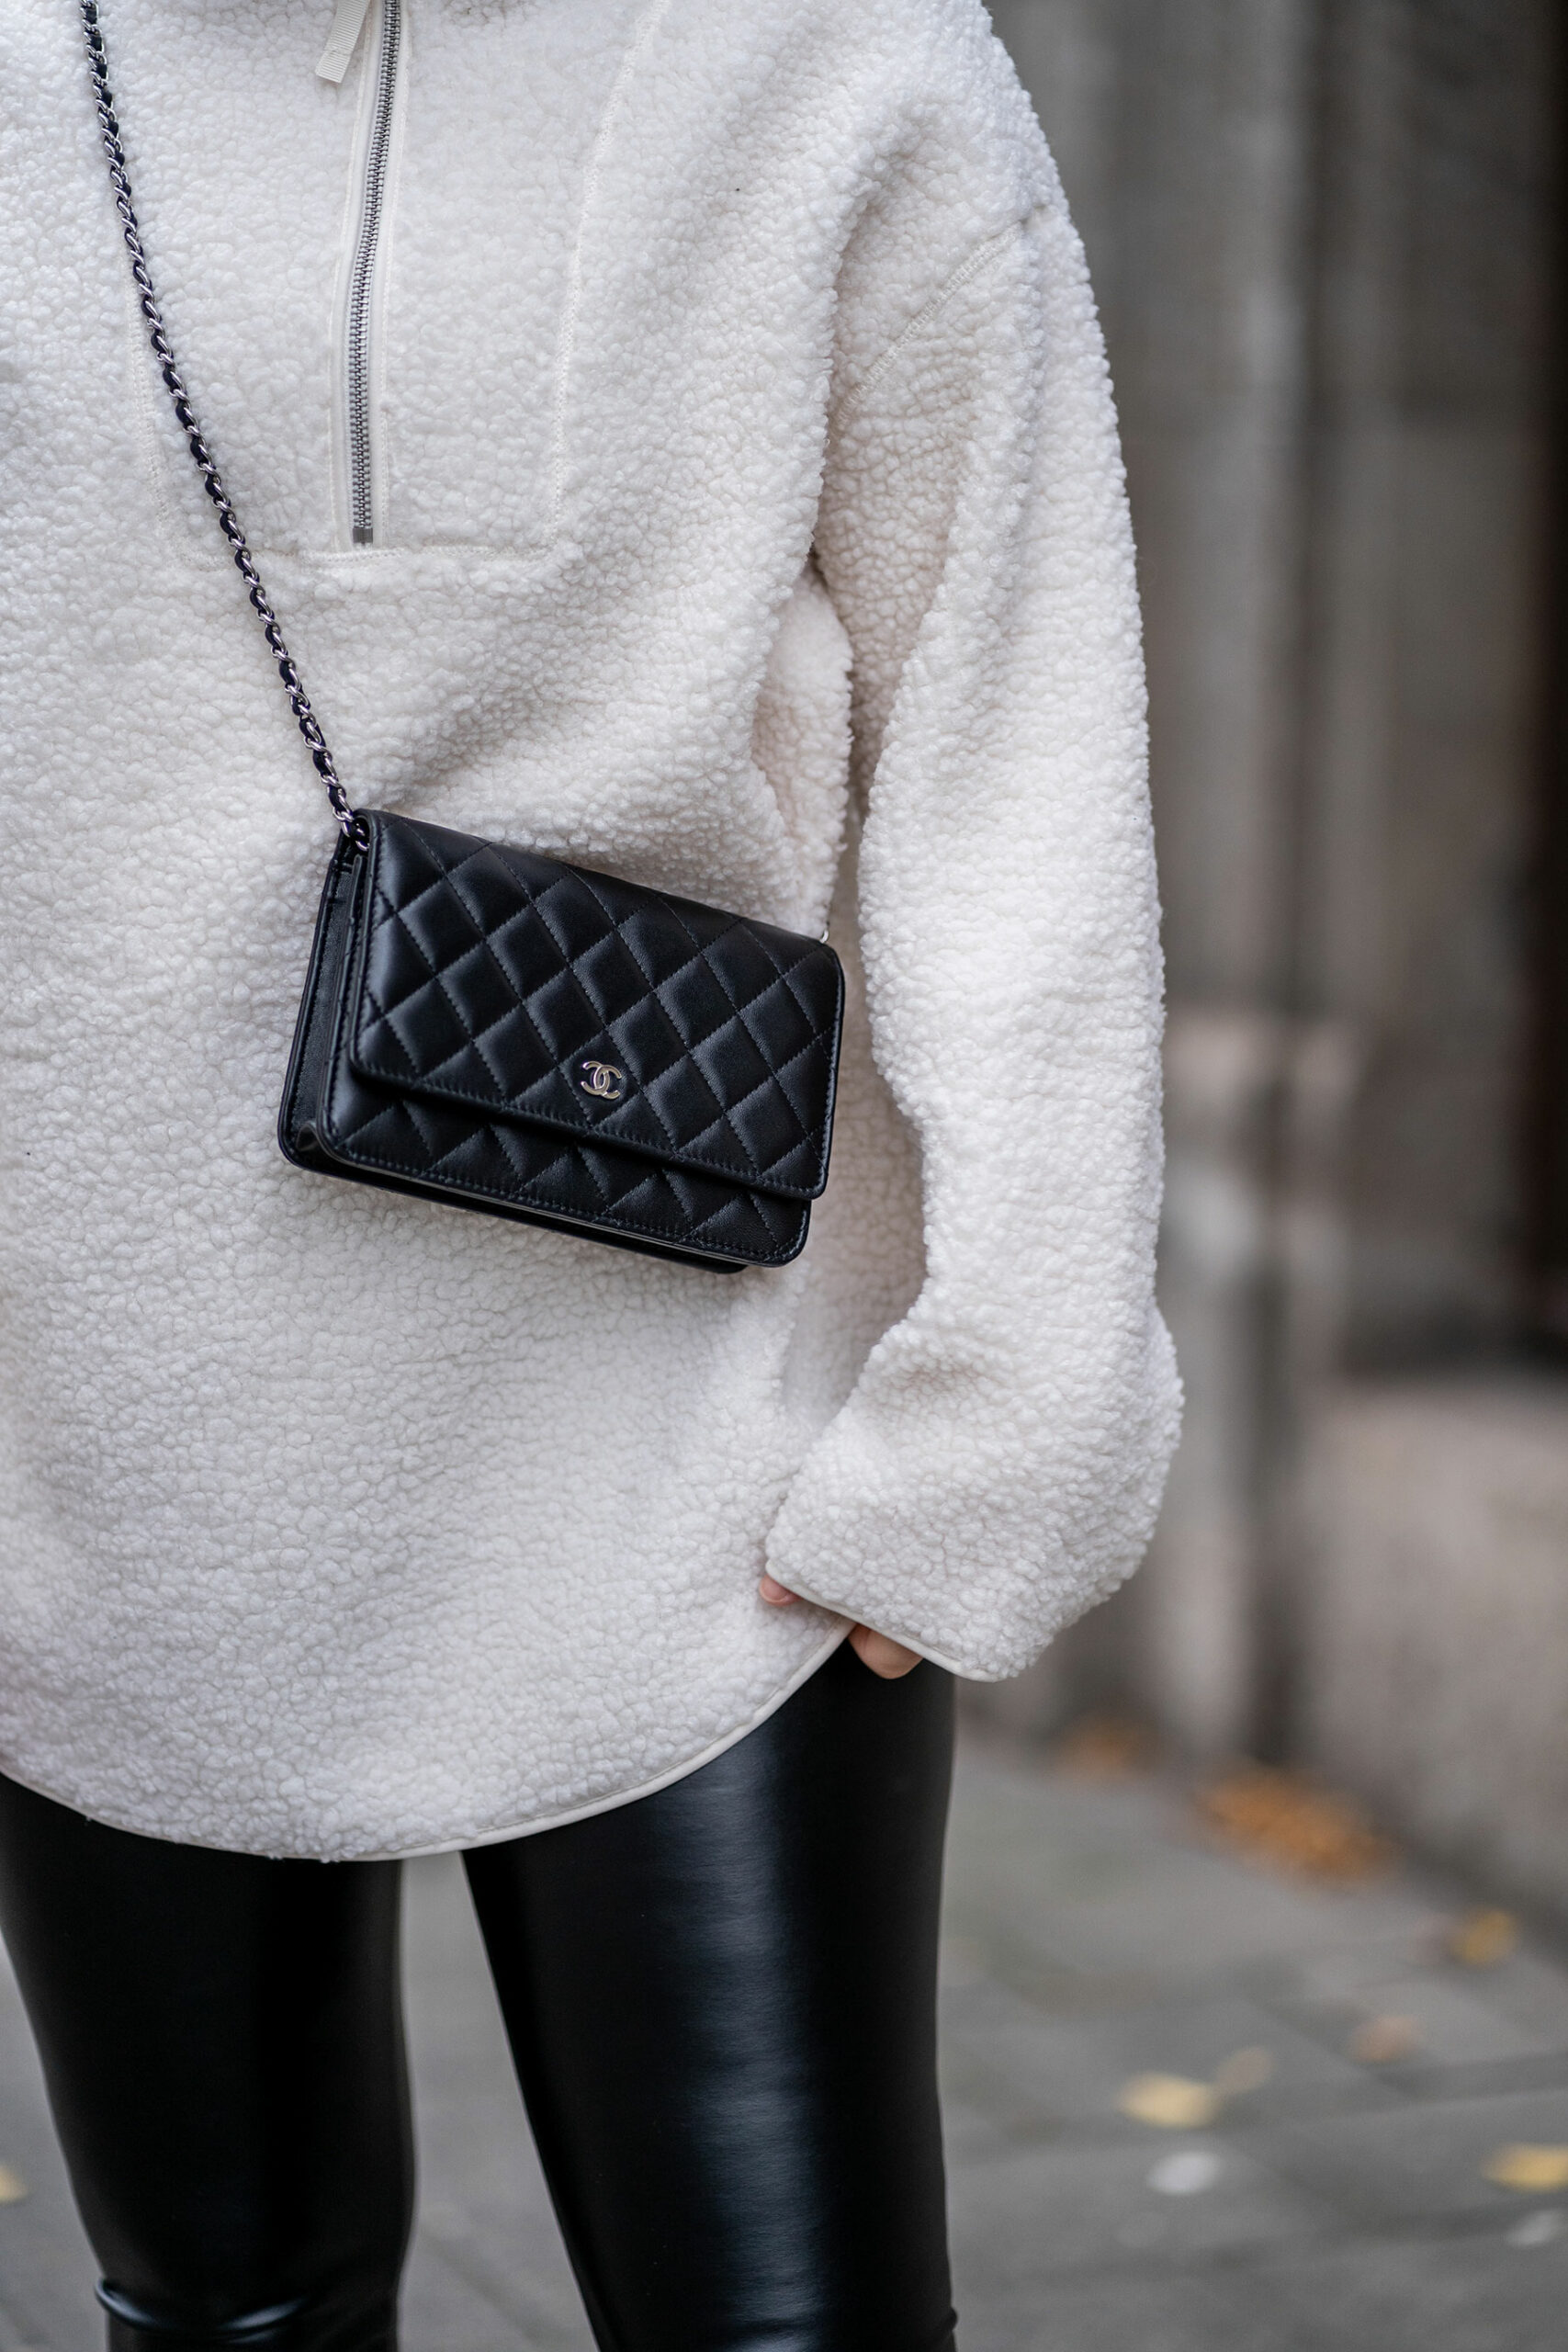 chanel wallet on chain teddy pullover outfit